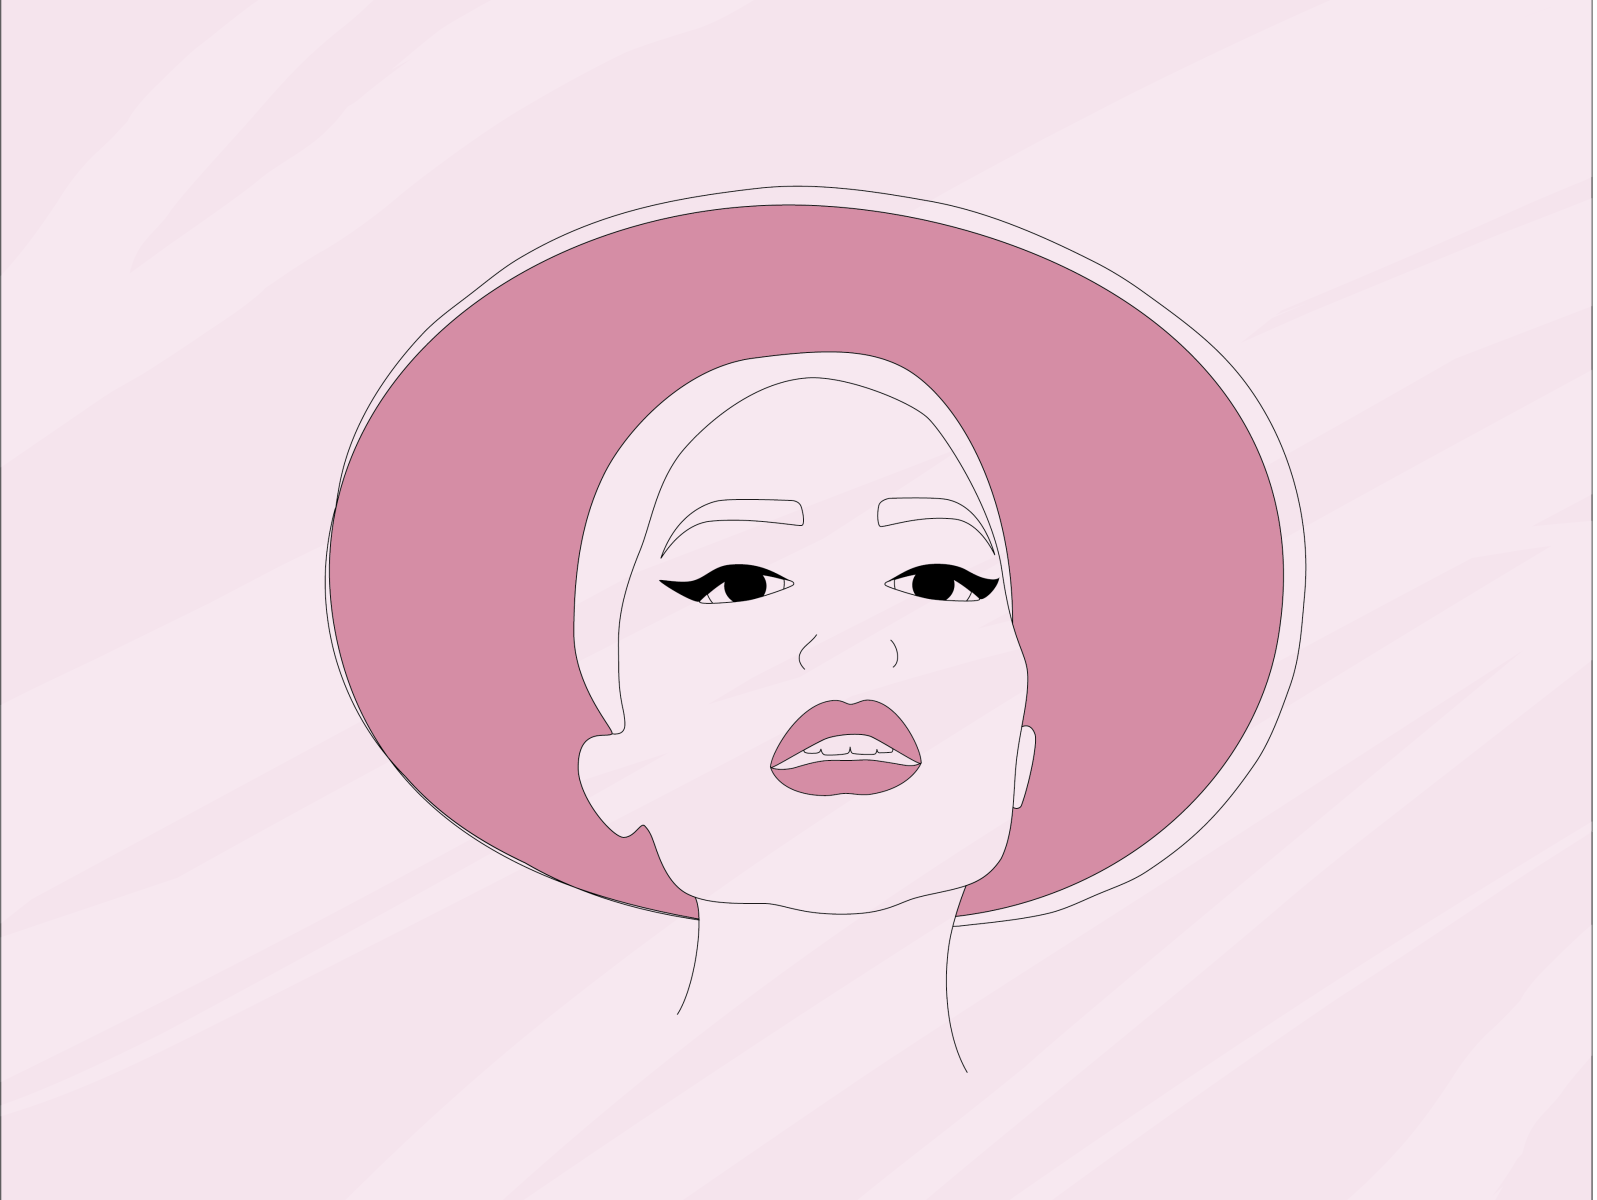 Woman Line Art by Sarah Grover on Dribbble